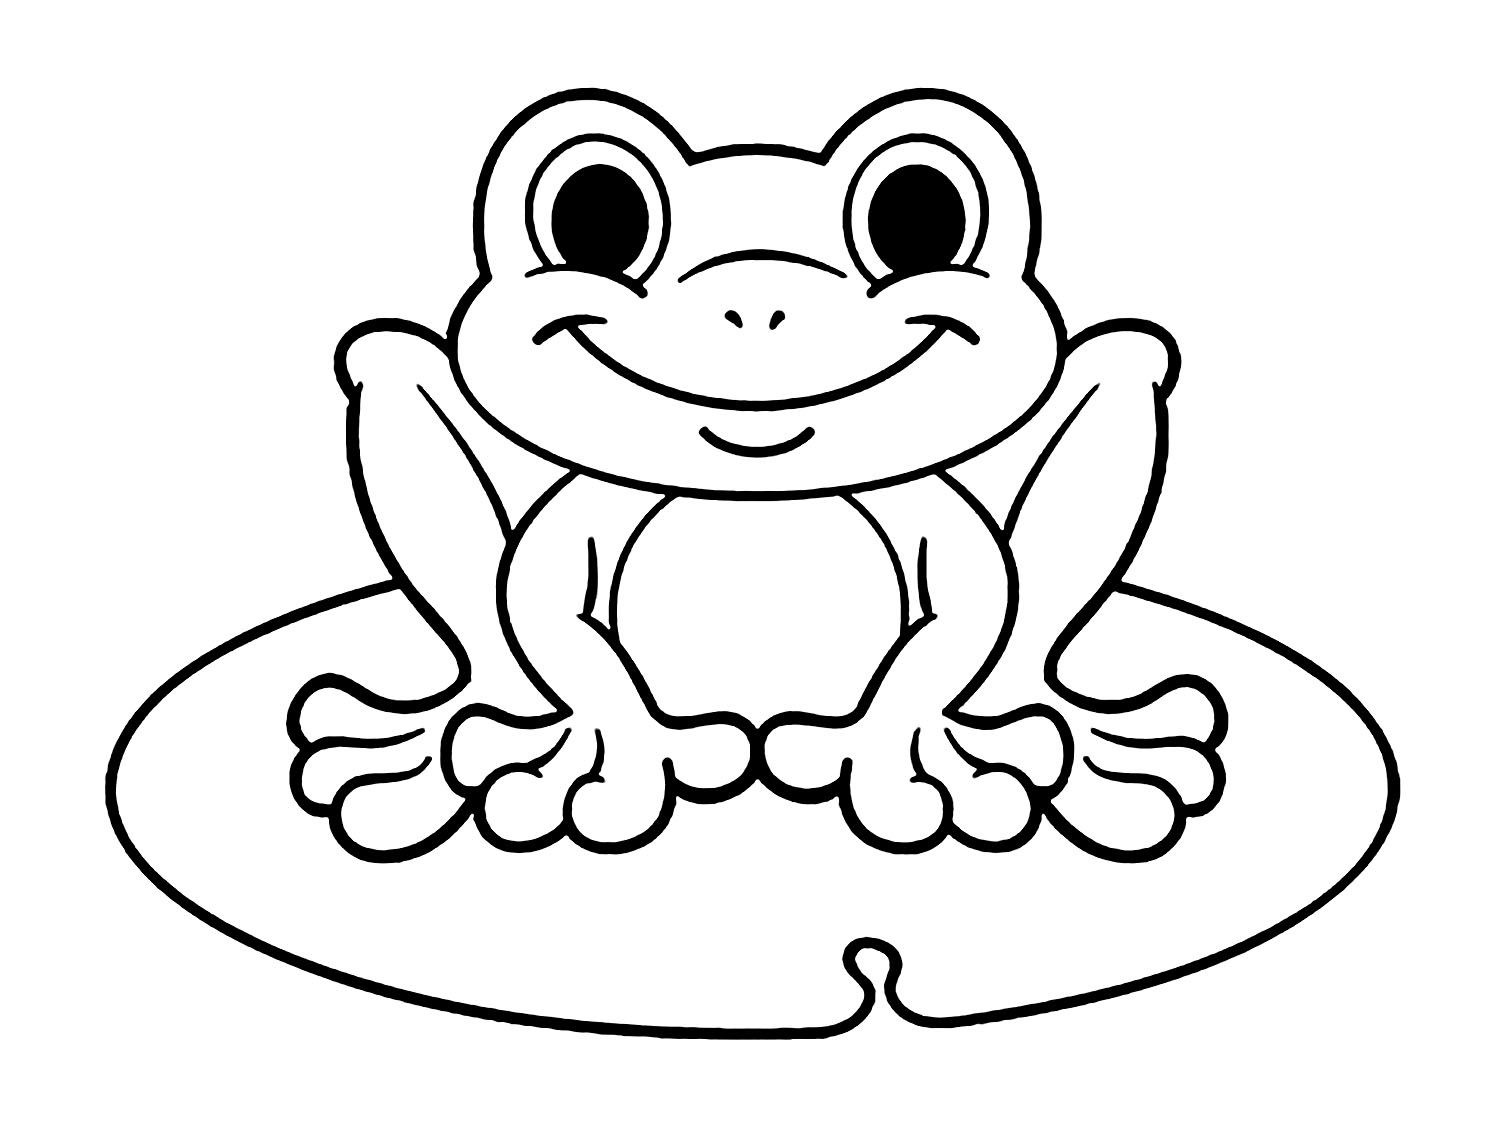 Frogs to print for free Frogs Kids Coloring Pages